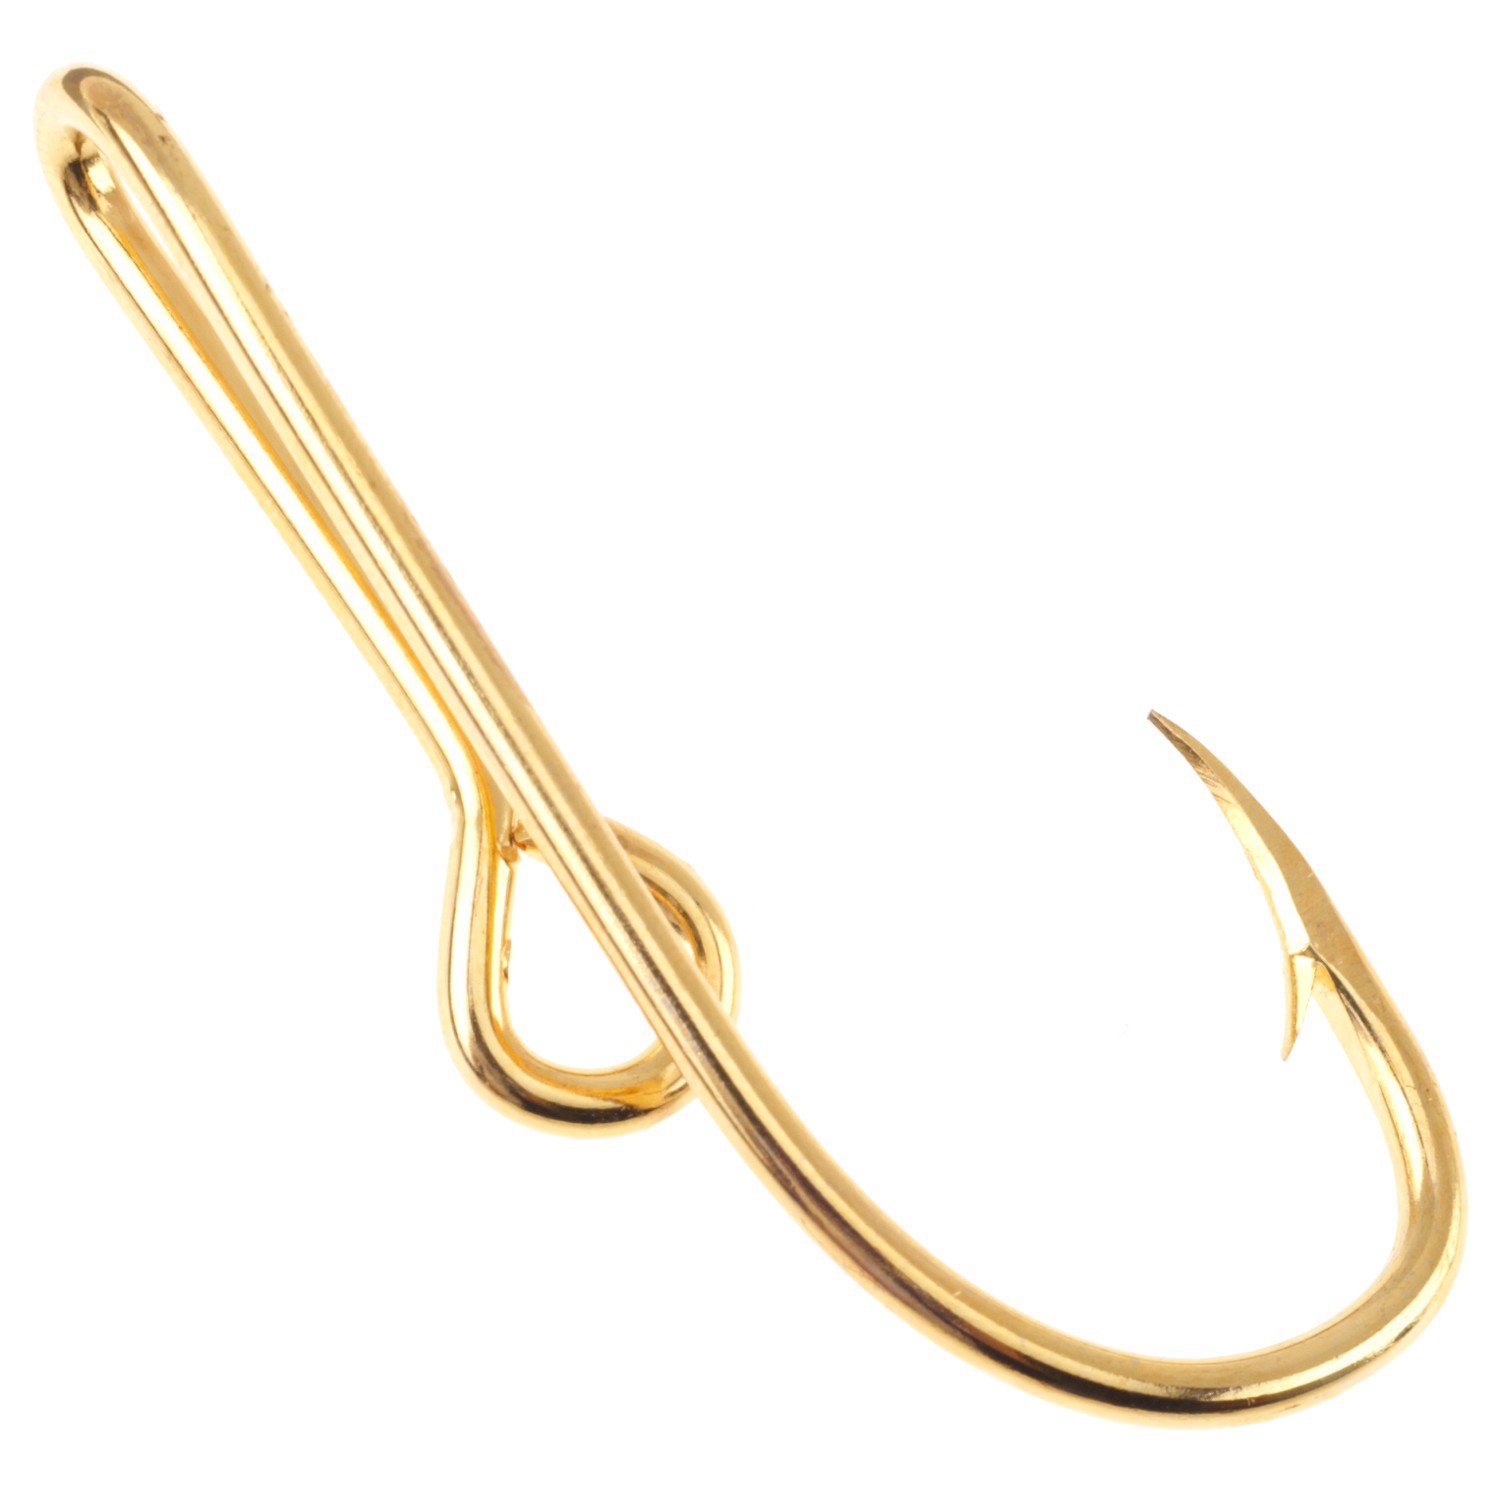 50 EAGLE CLAW HAT HOOKS Hat Pin/Tie Clasp GOLD PLATED FISH HOOK HAT PINS #155 